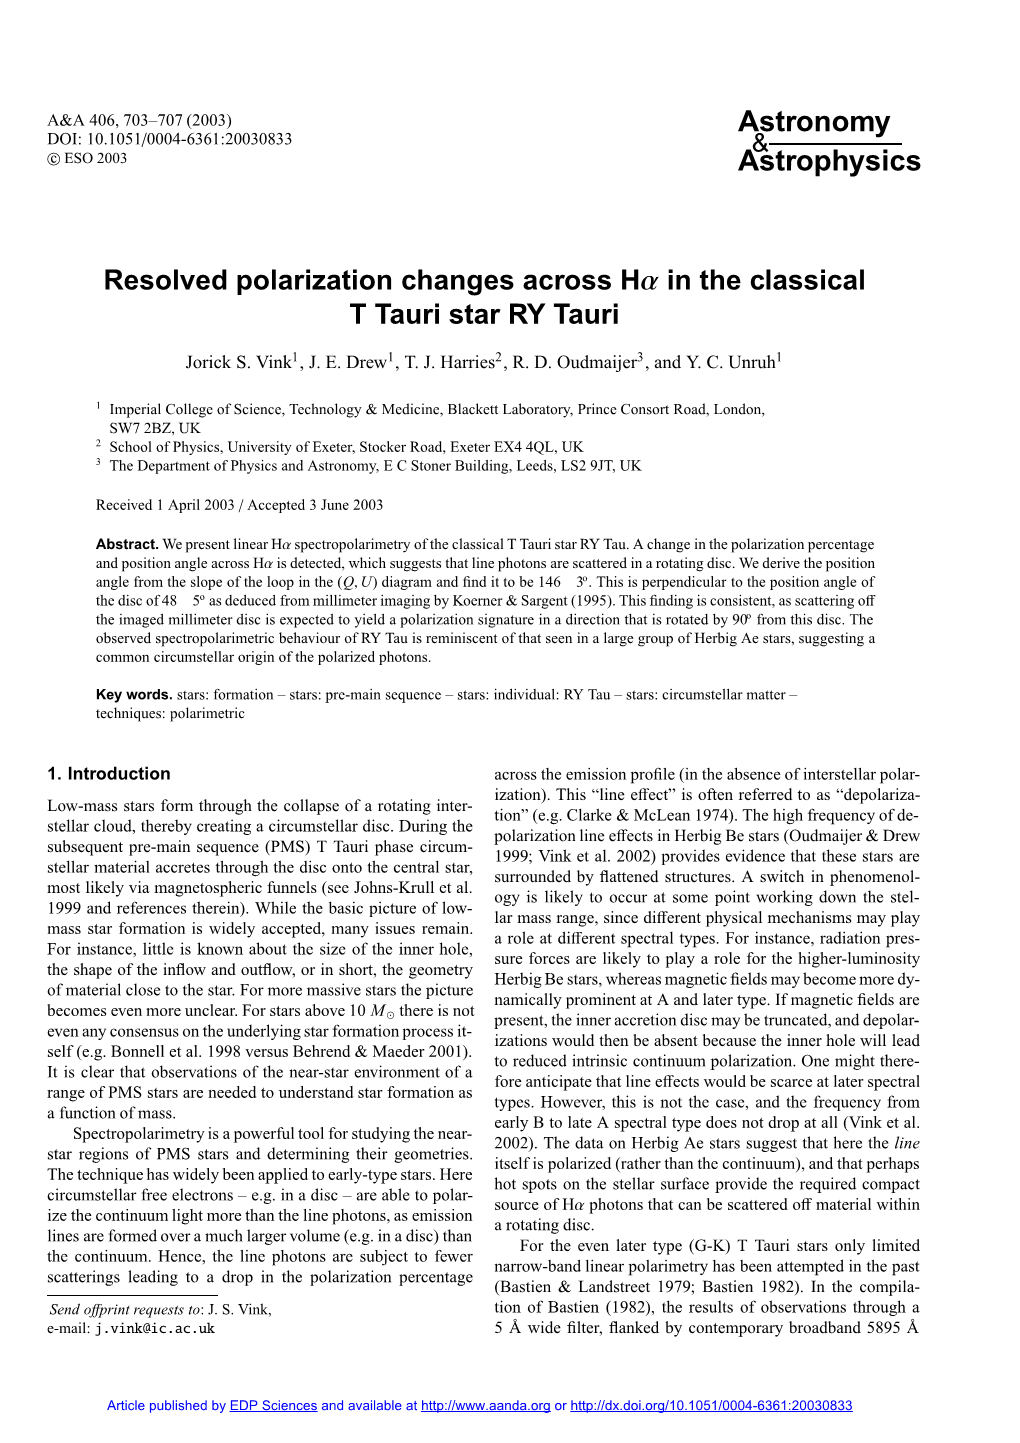 Resolved Polarization Changes Across Hα in the Classical T Tauri Star RY Tauri